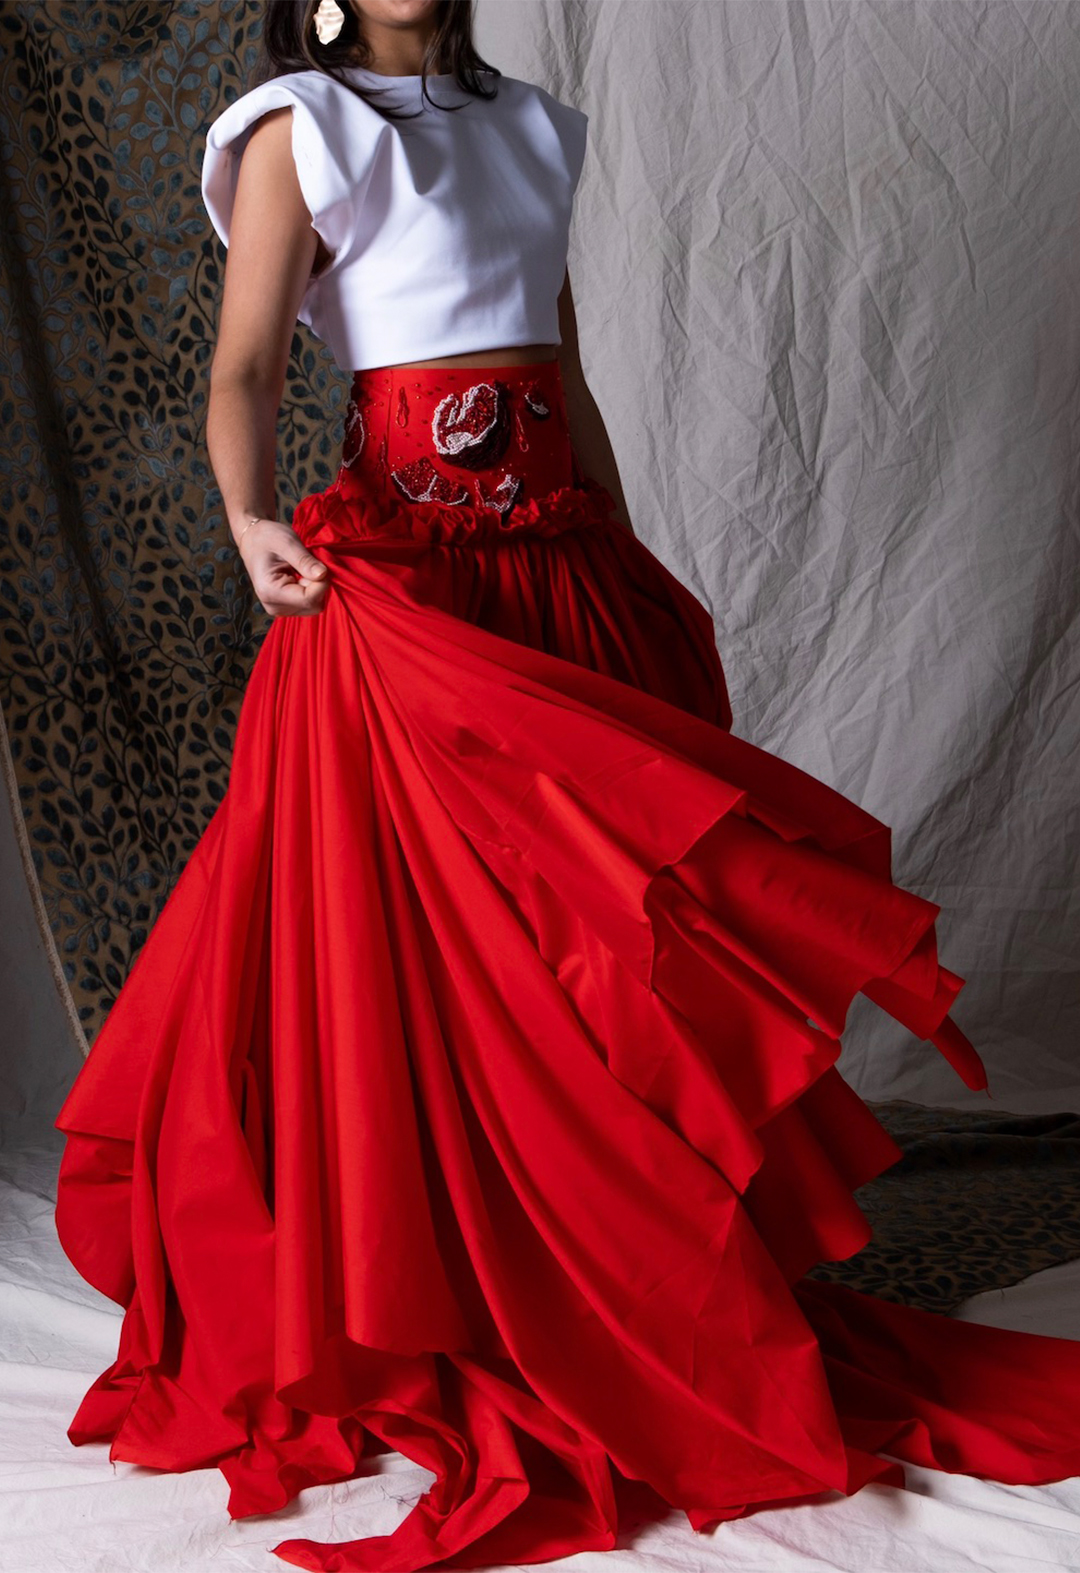 Ani wears a compact ponte T-shirt with structured shoulders, paired with a handkerchief skirt with hand-beaded pomegranates on a drop-waisted yoke. 